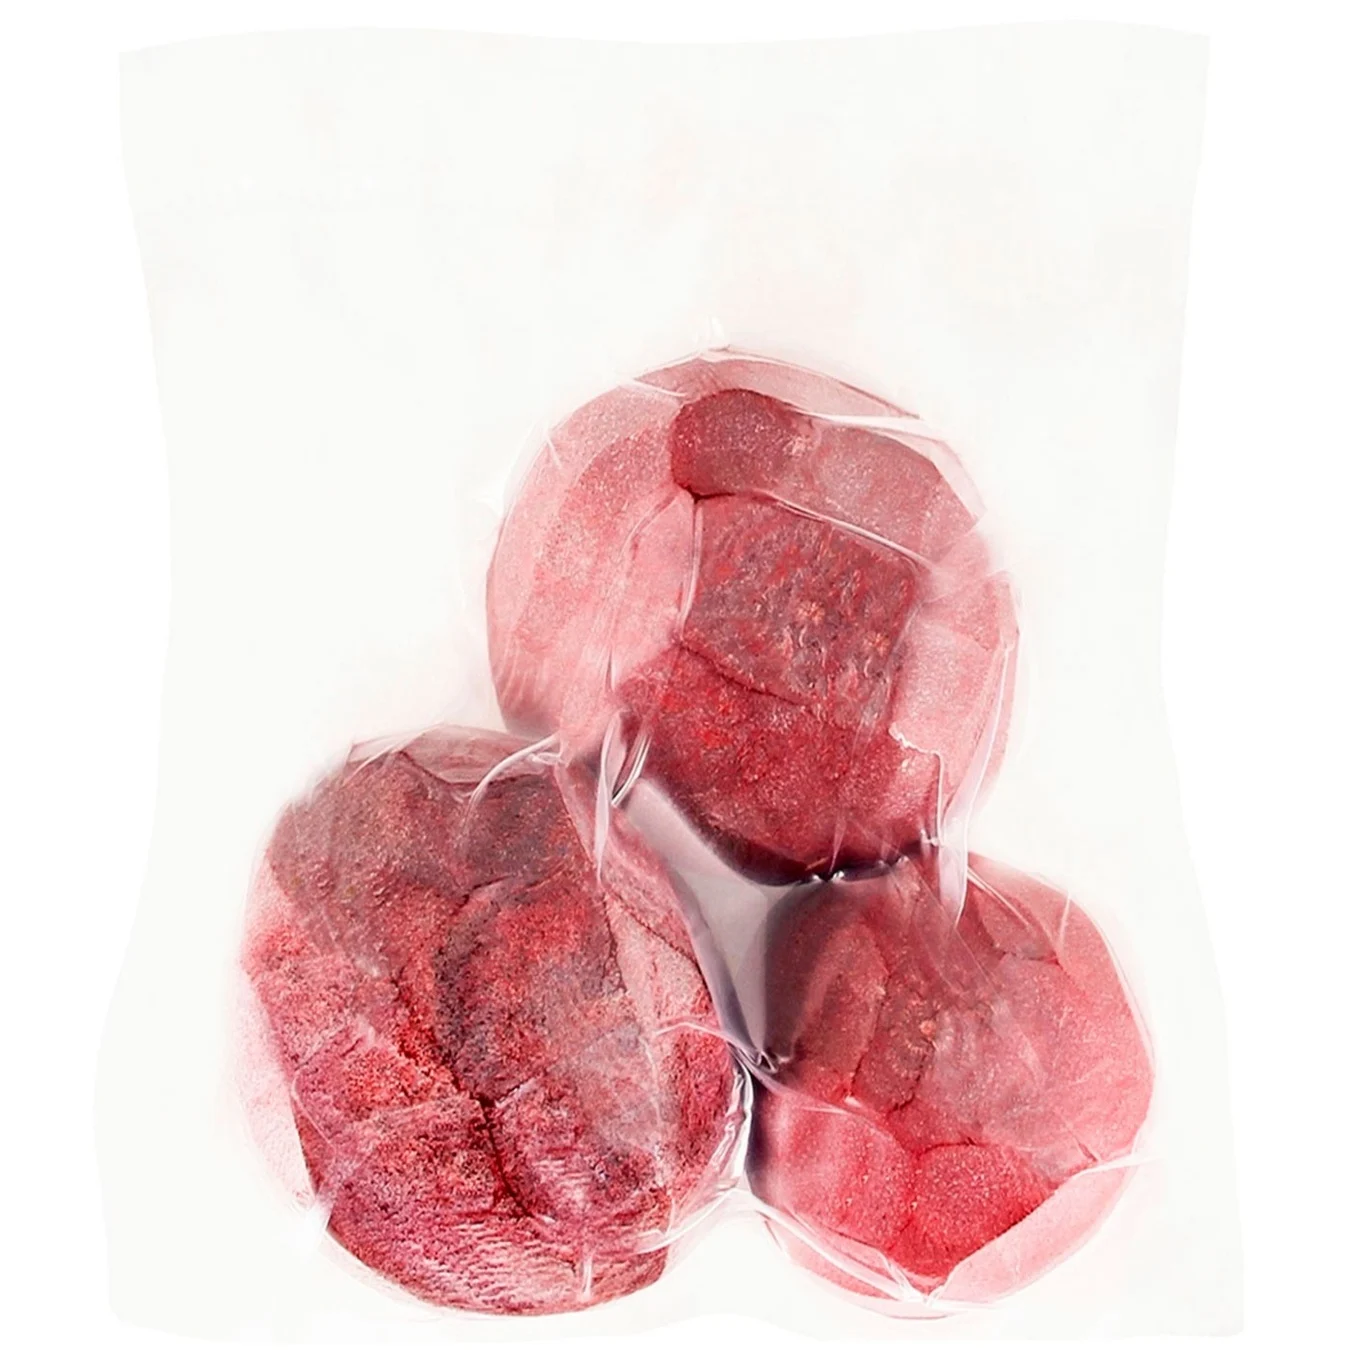 Whole beetroot peeled and washed 500g